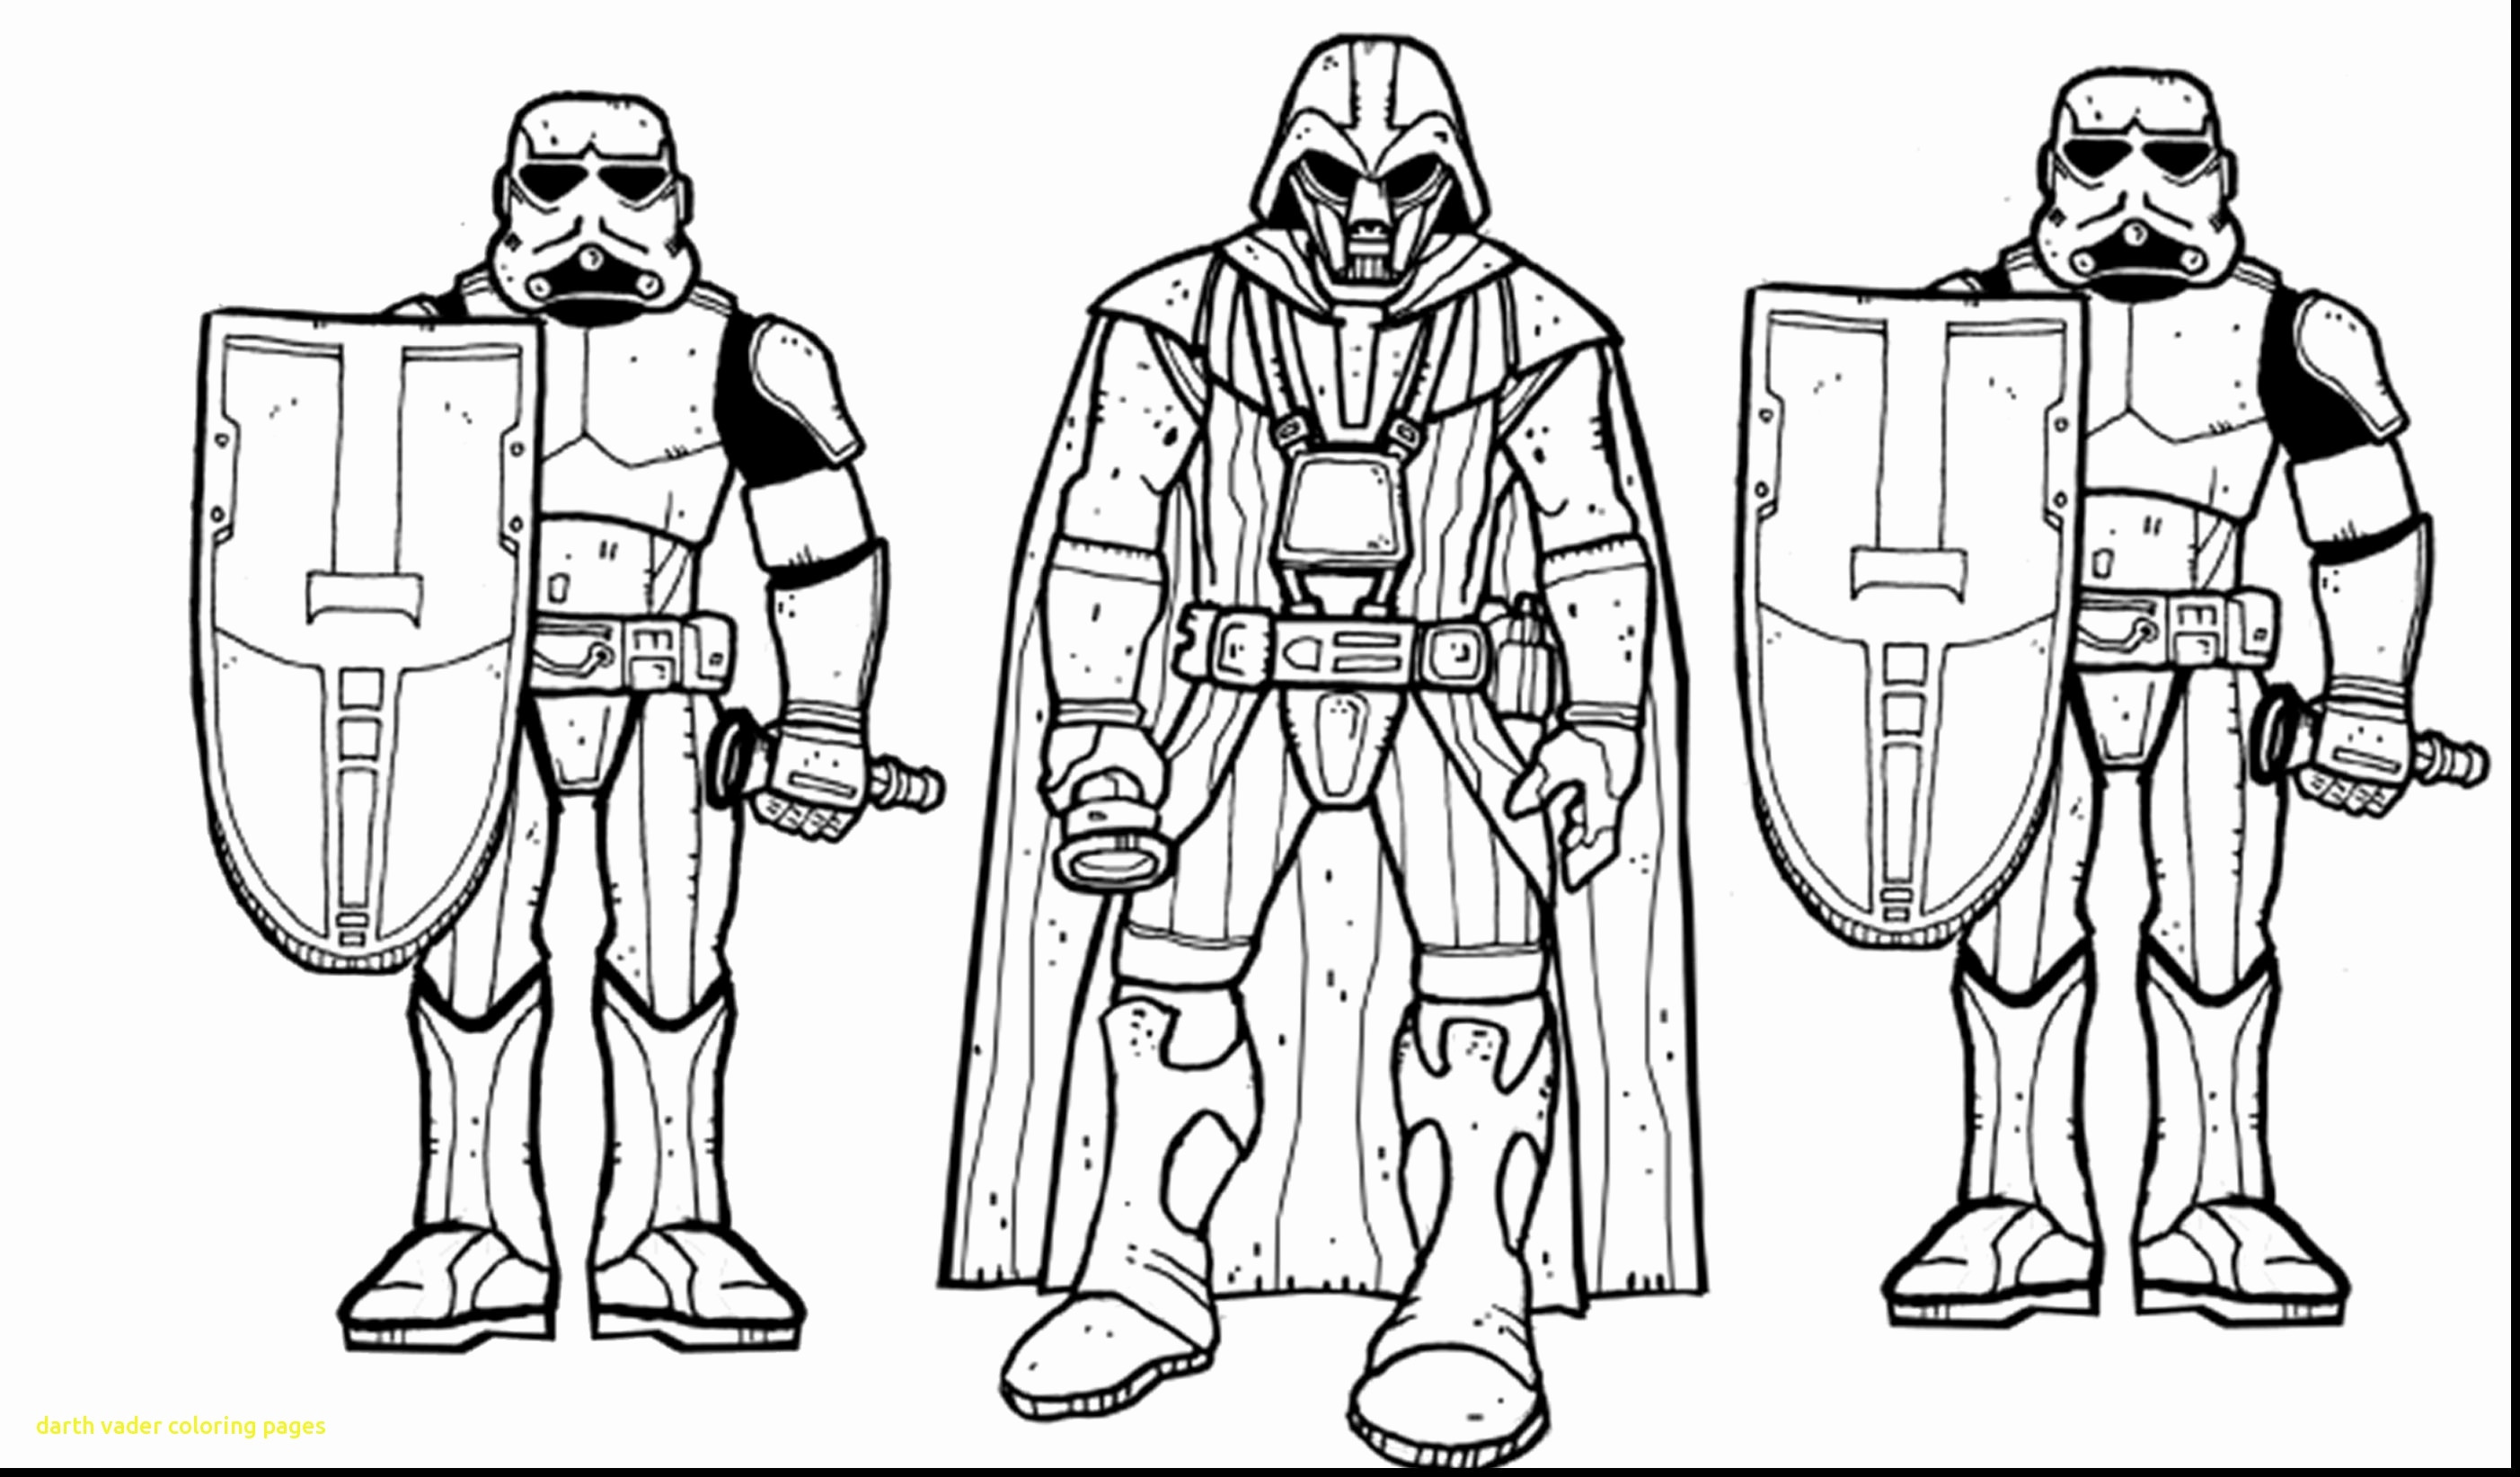  Lego Darth Vader Coloring Page for Kids